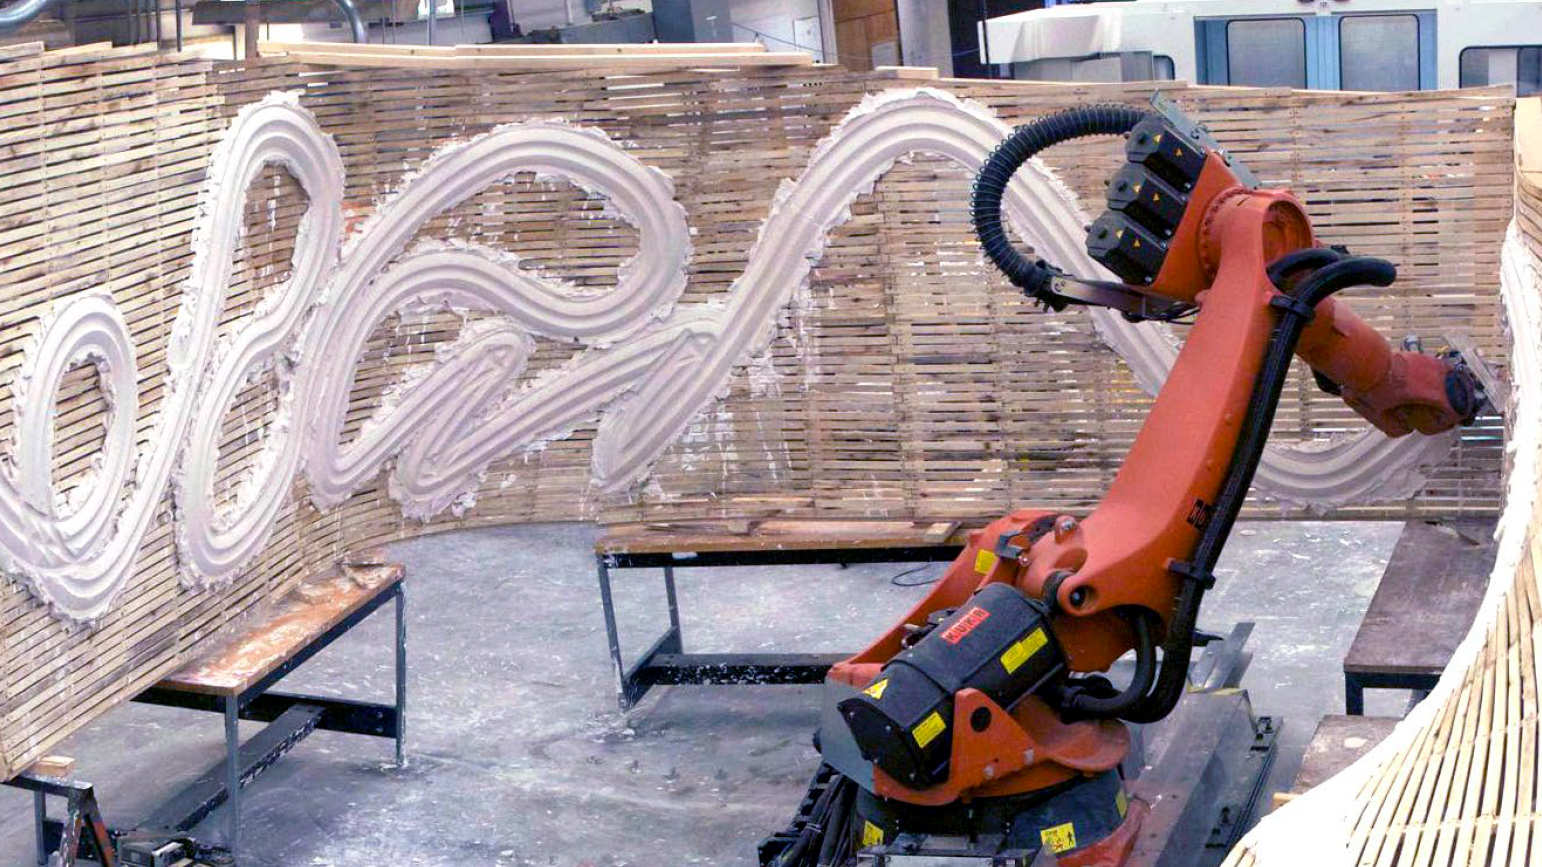 Robot applying plaster to a slatted wall